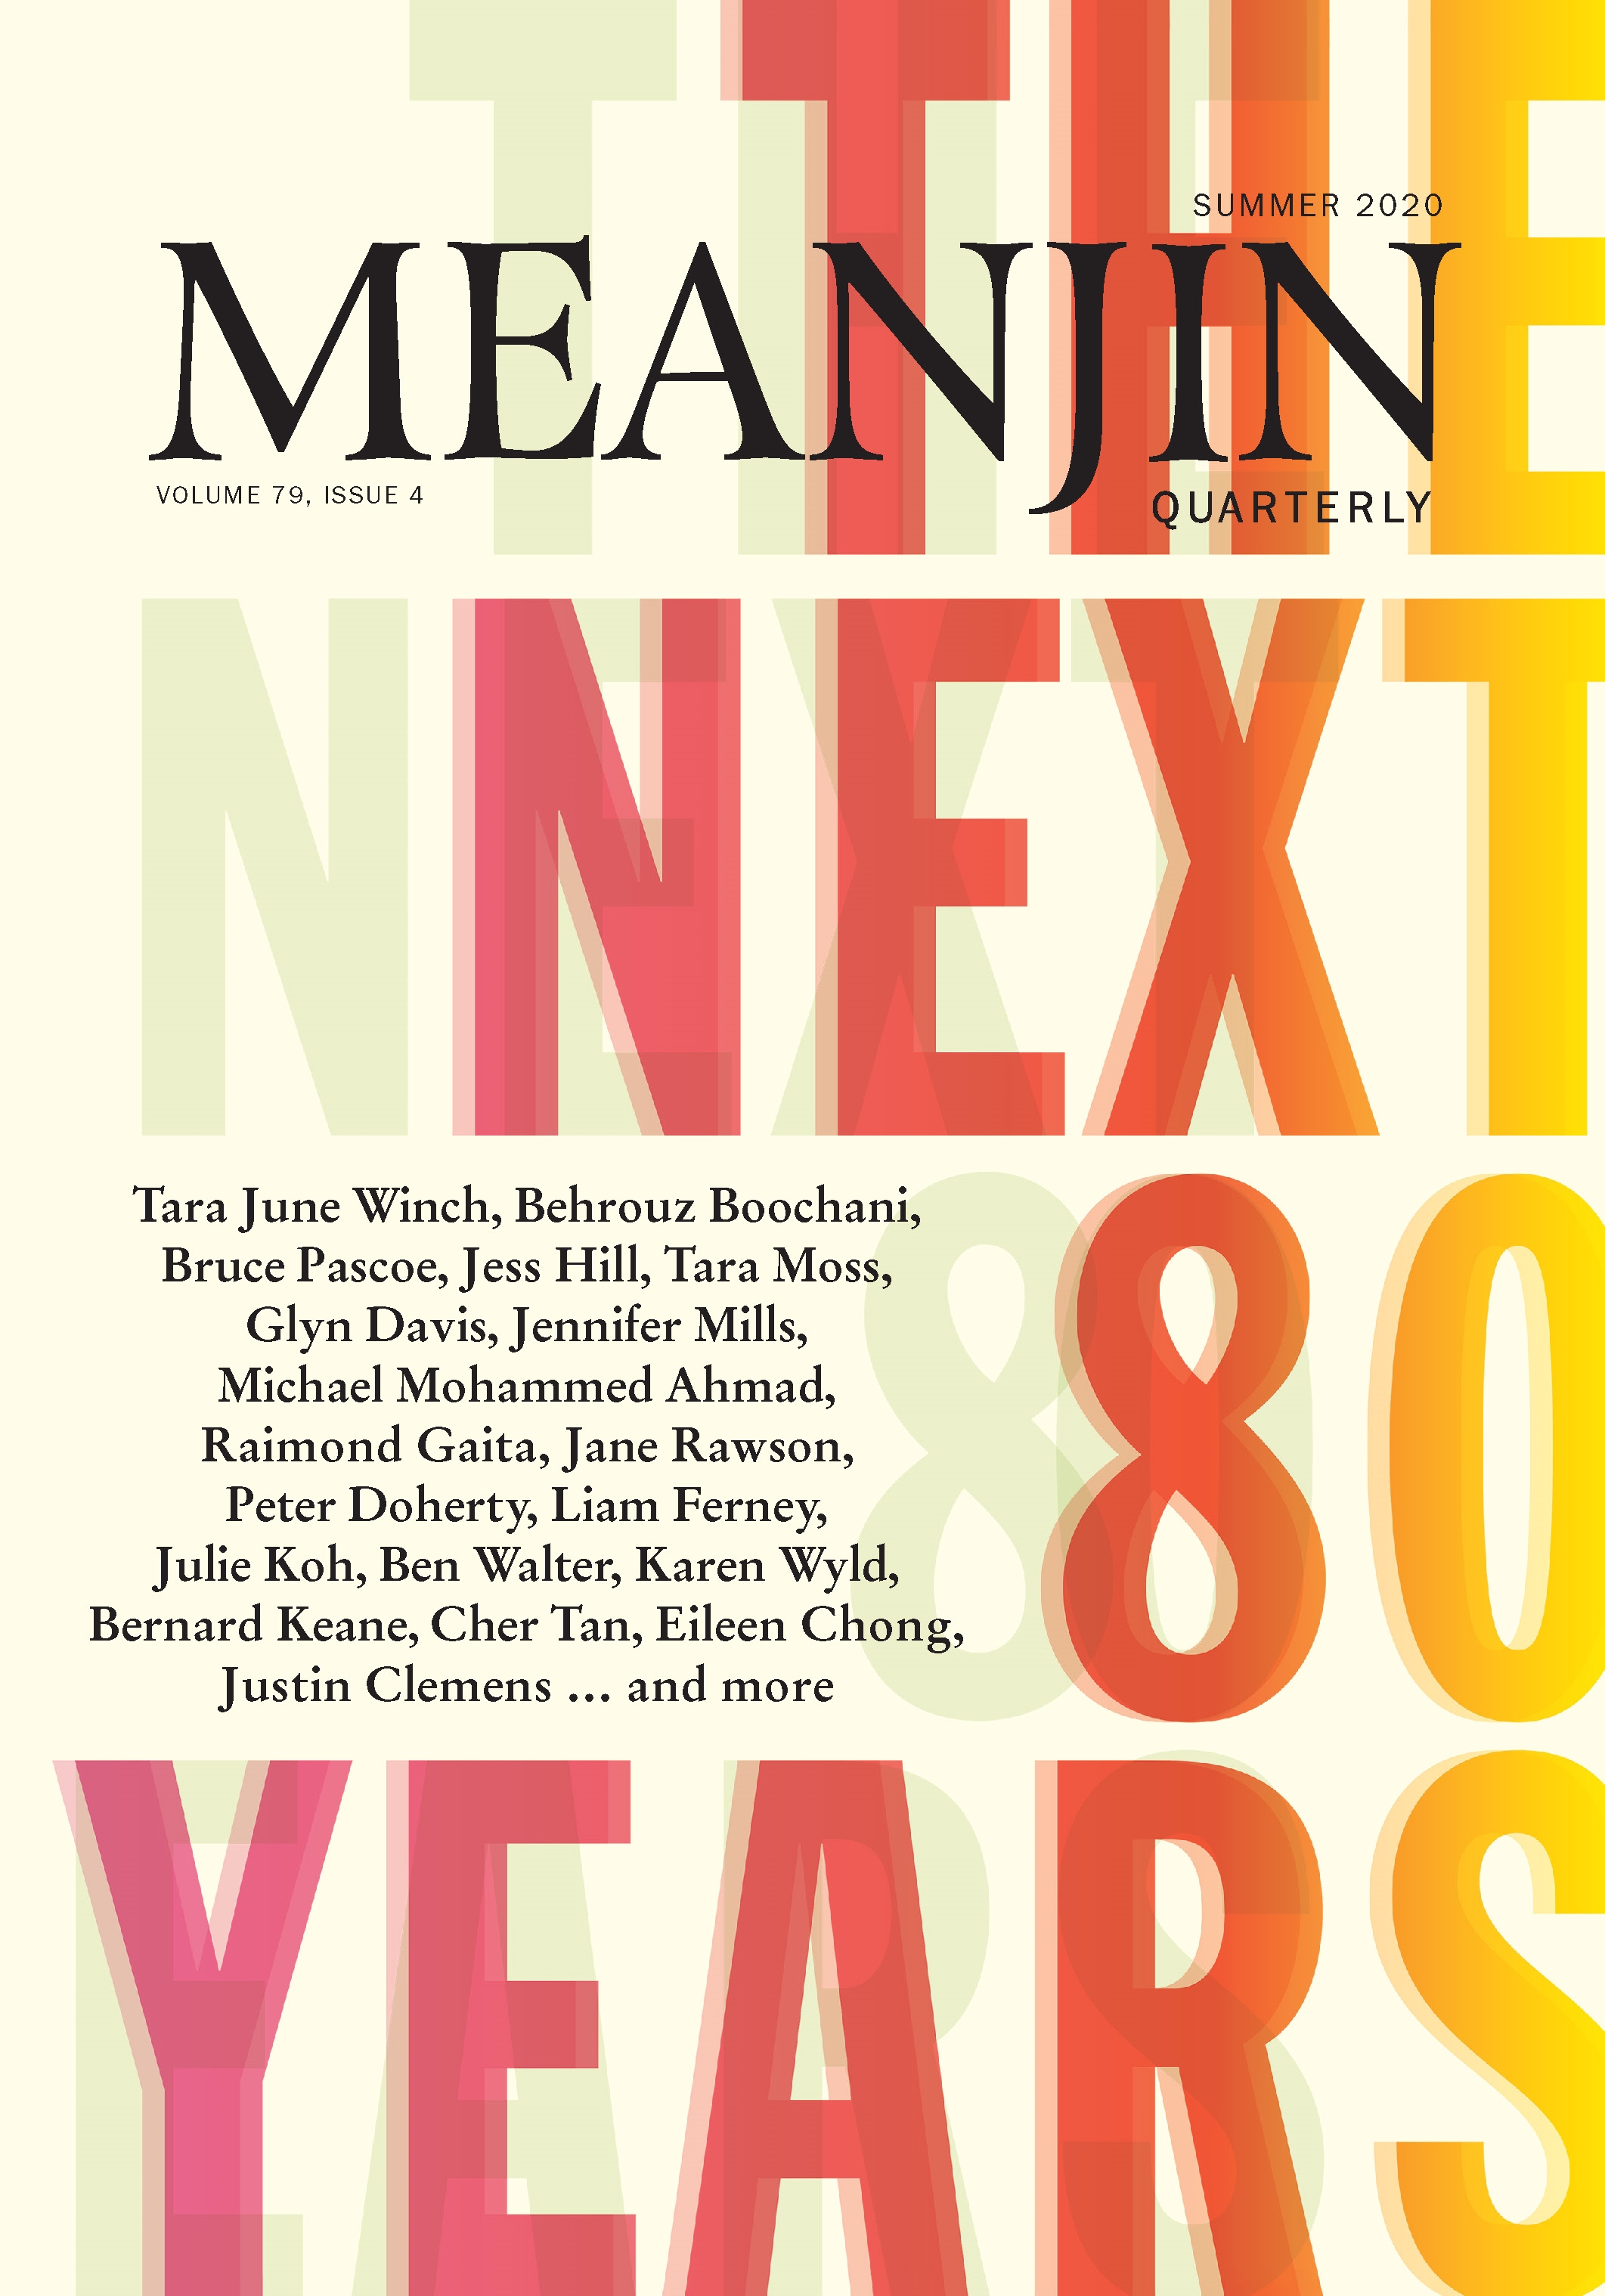 Cover of Meanjin's 80th anniversary edition.